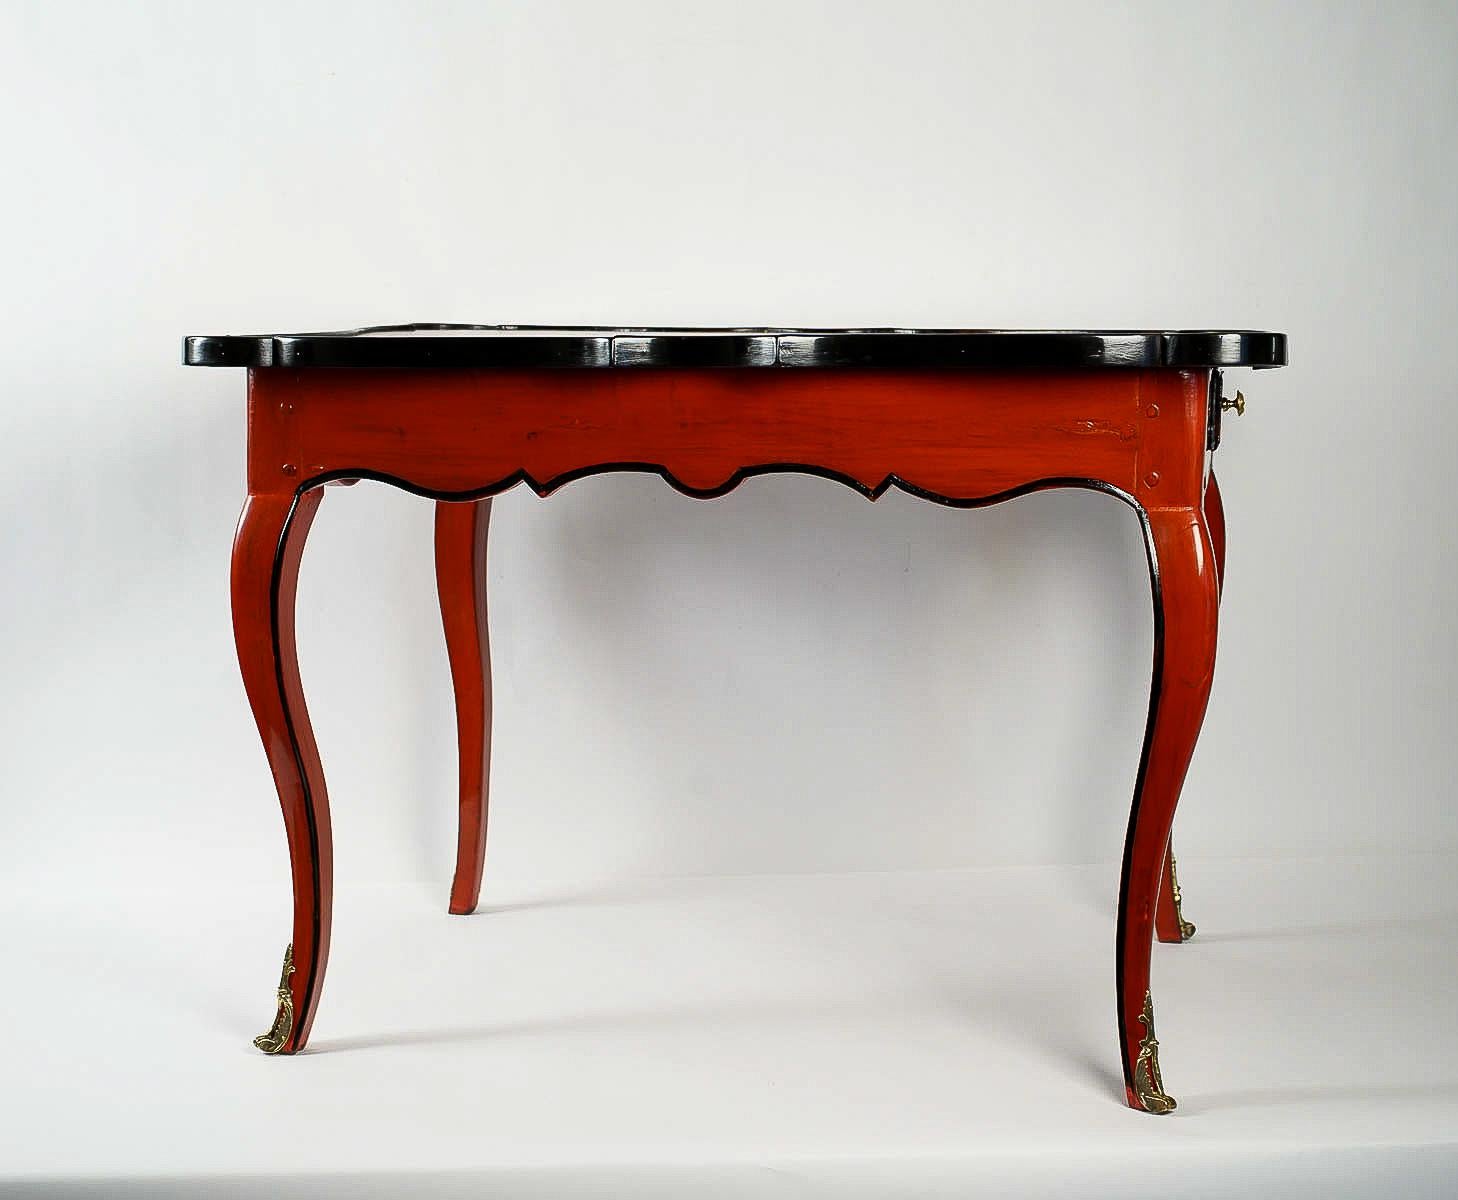 We are pleased to present you, a lovely and exciting chestnut lacquered red and black game table circa 1740, having a drawer on each side and an embossed leather playing surface. Our game table rests on serpentine legs.

French Louis XV period,